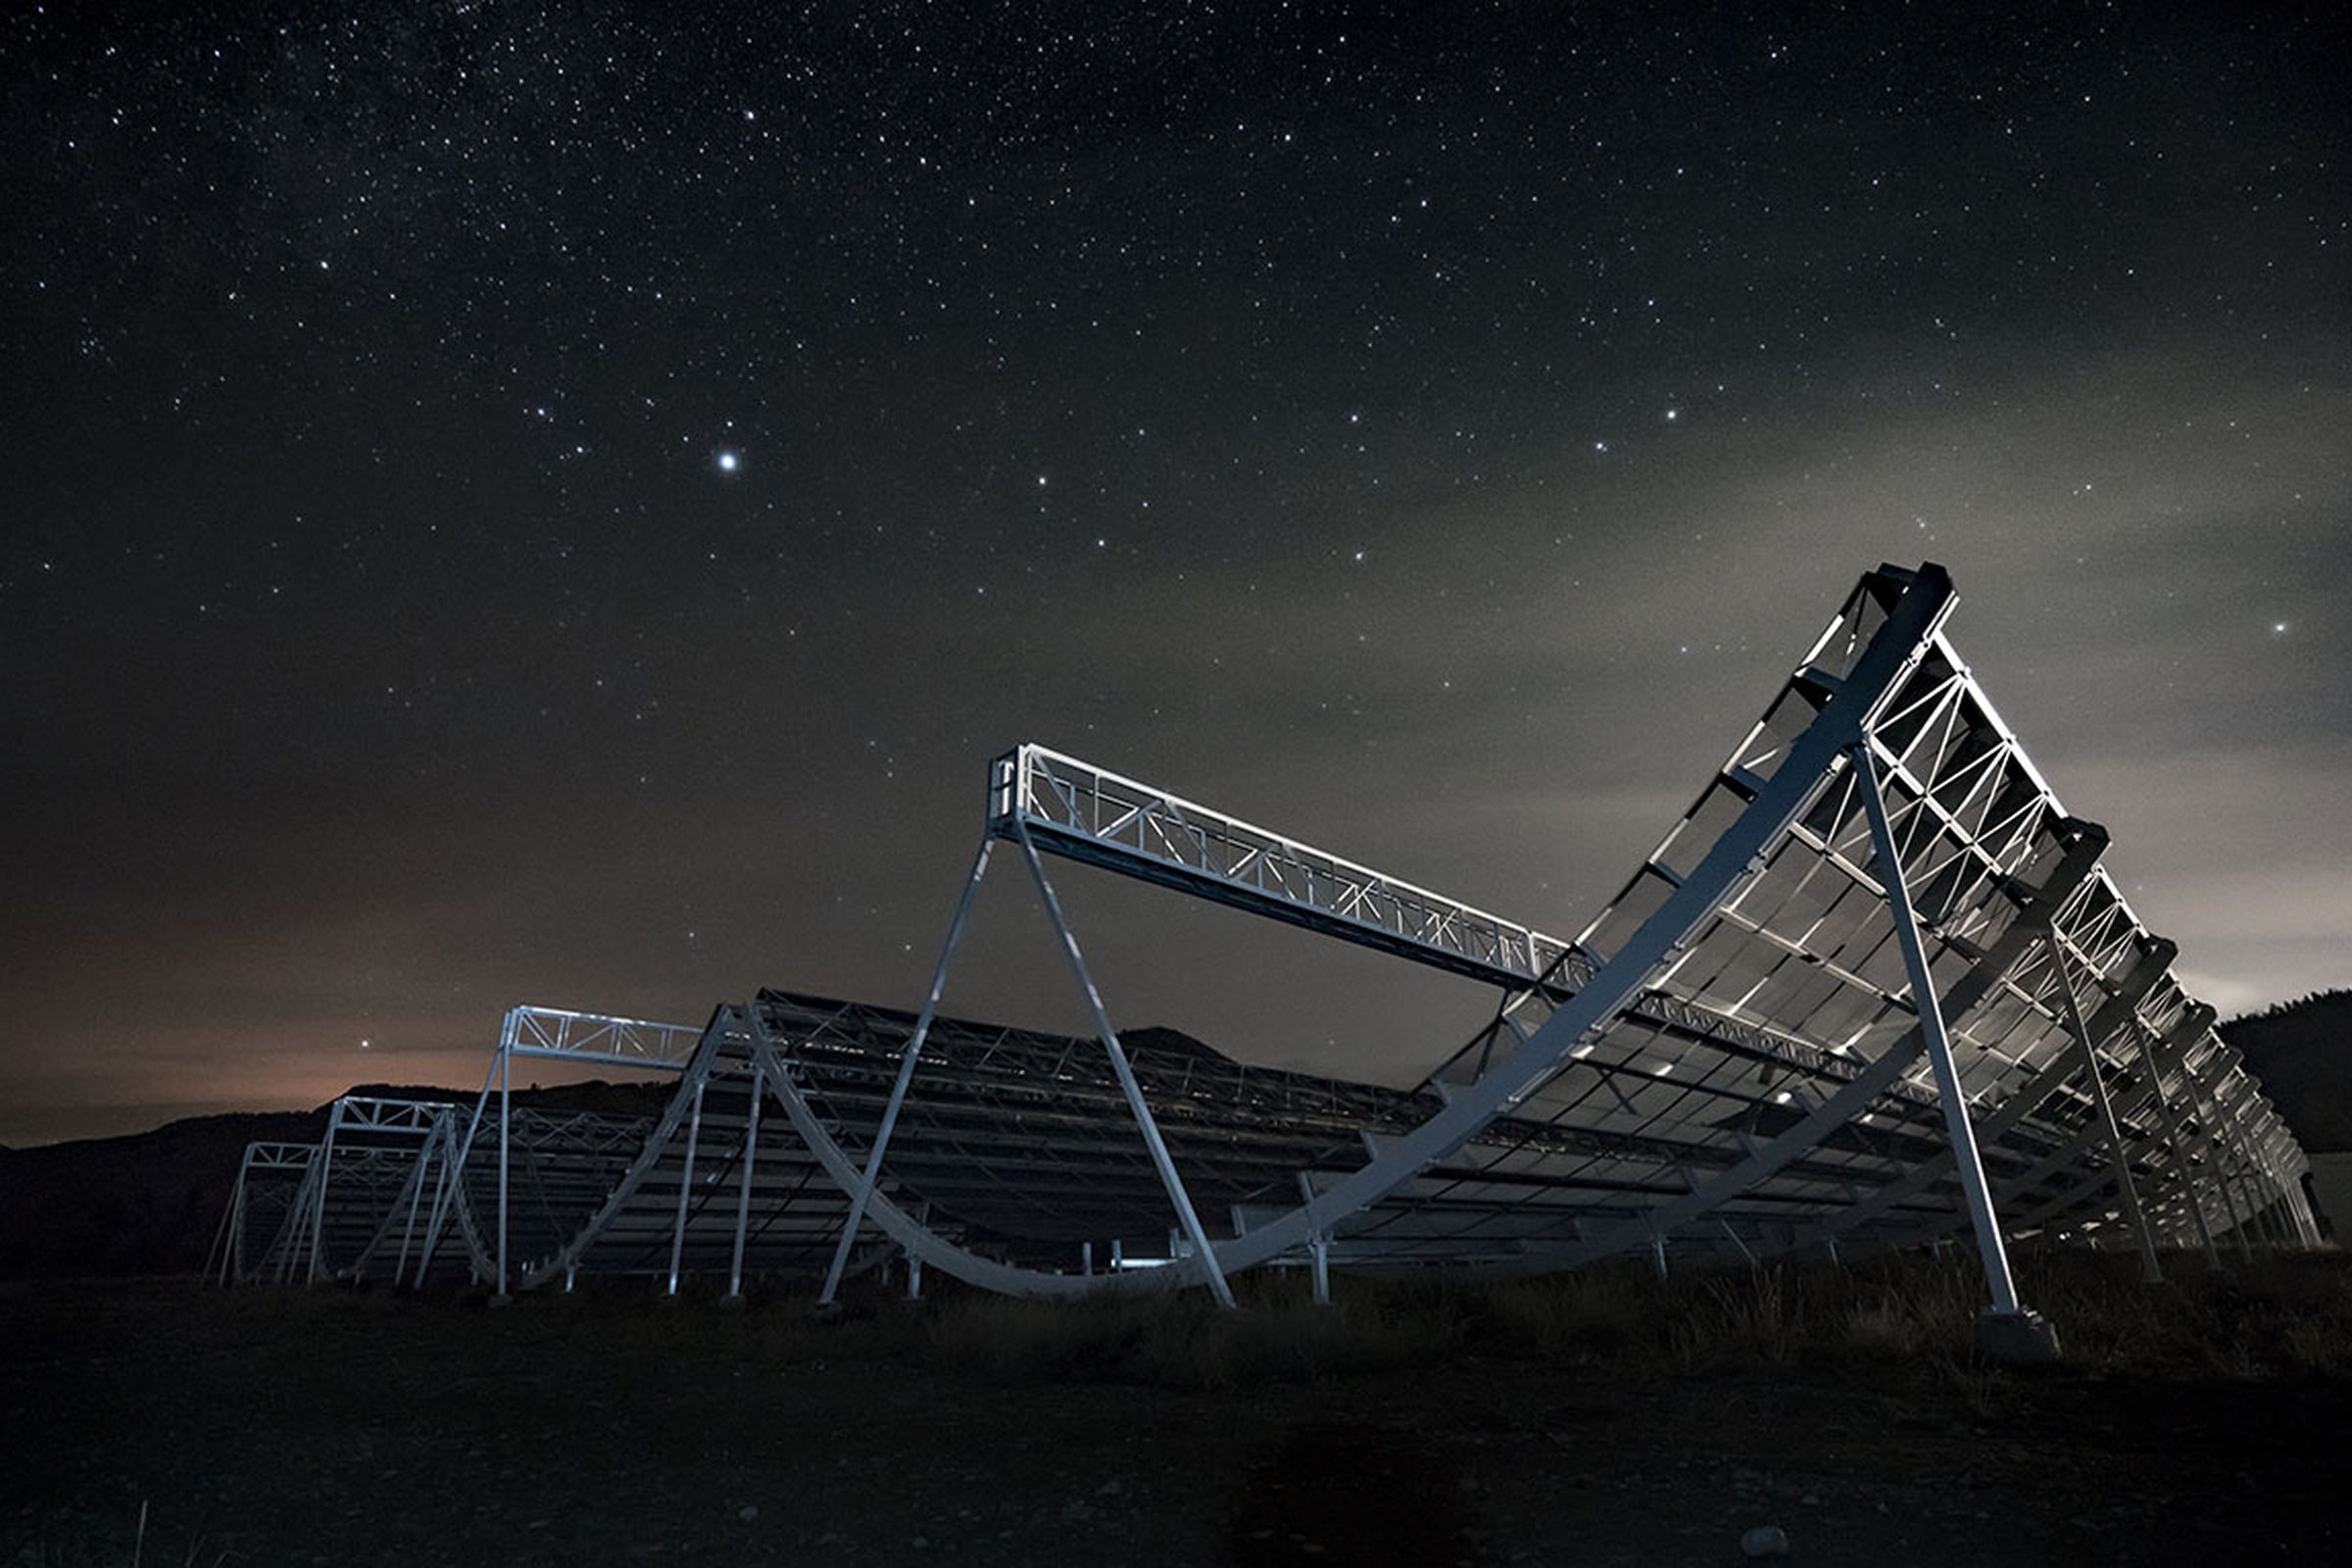 The CHIME telescope looking up at the night sky.